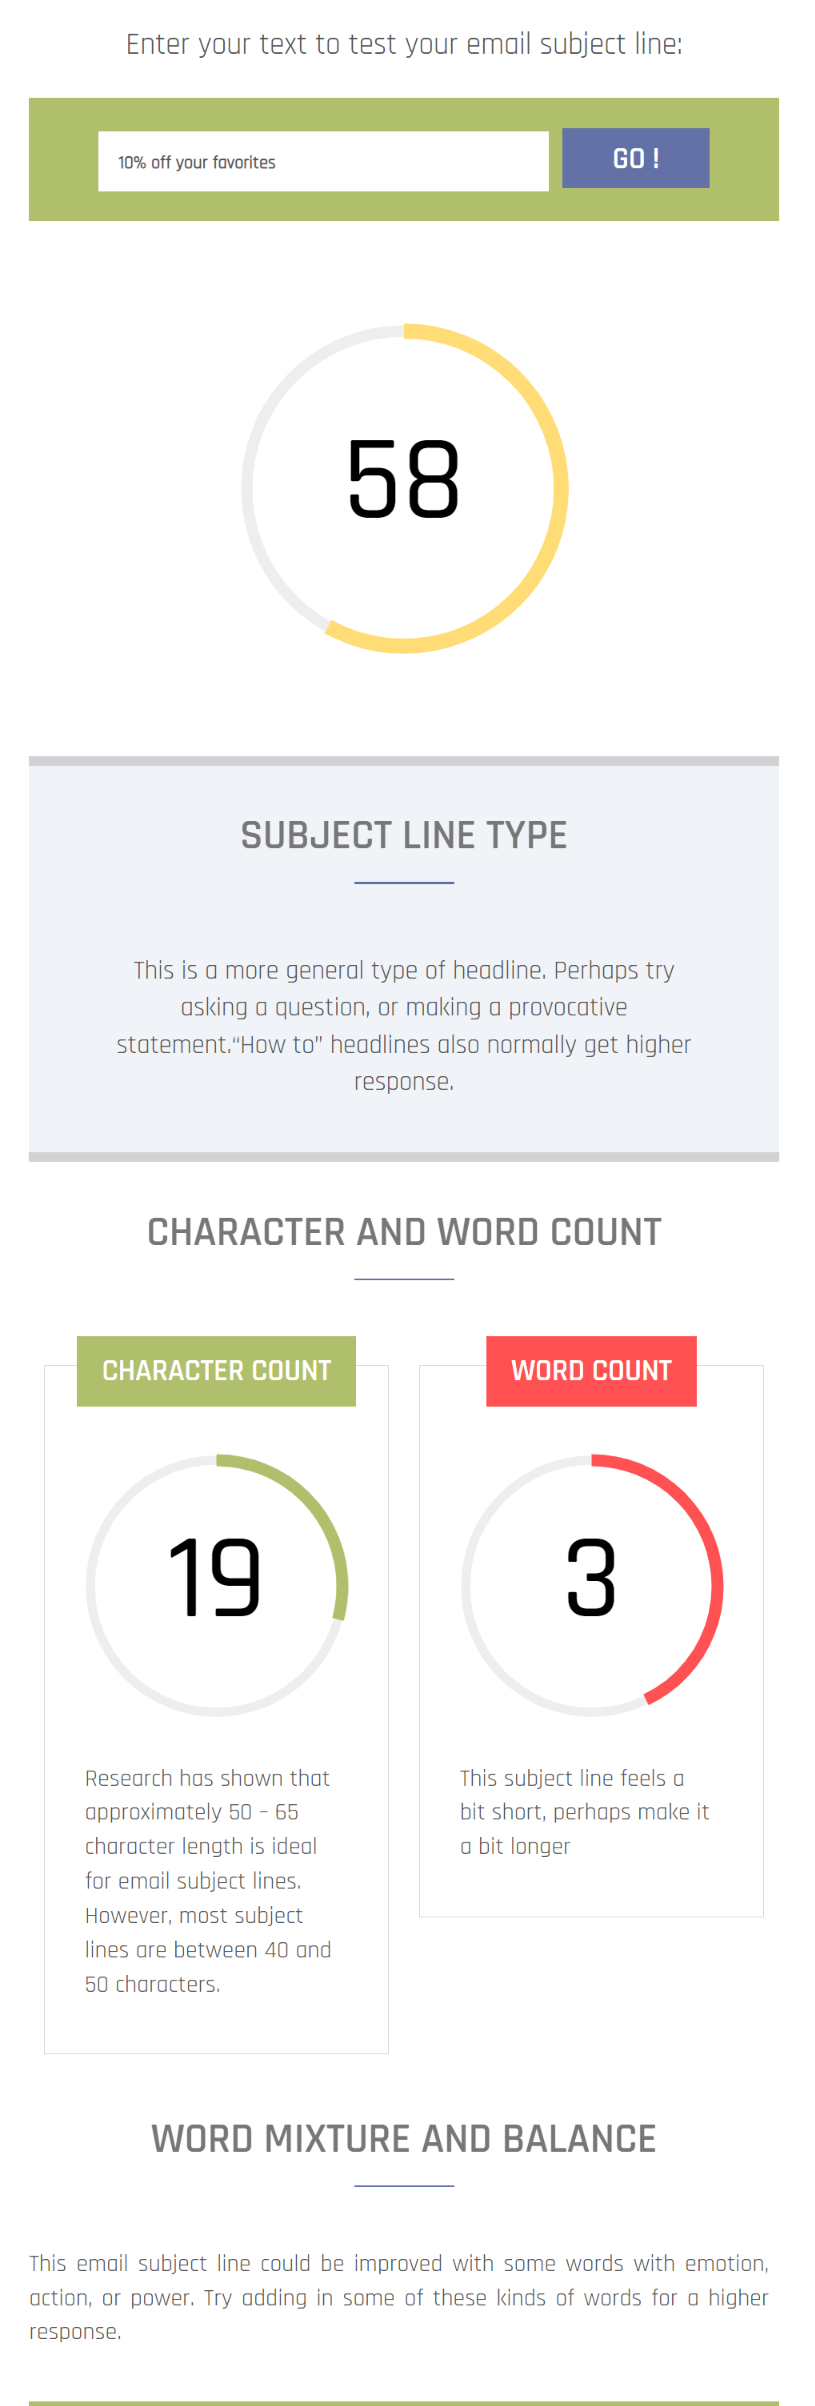 Net Atlantic Subject Line Grader evaluates character and word count, whether the subject line is catchy or not, and suggests improvements in tone